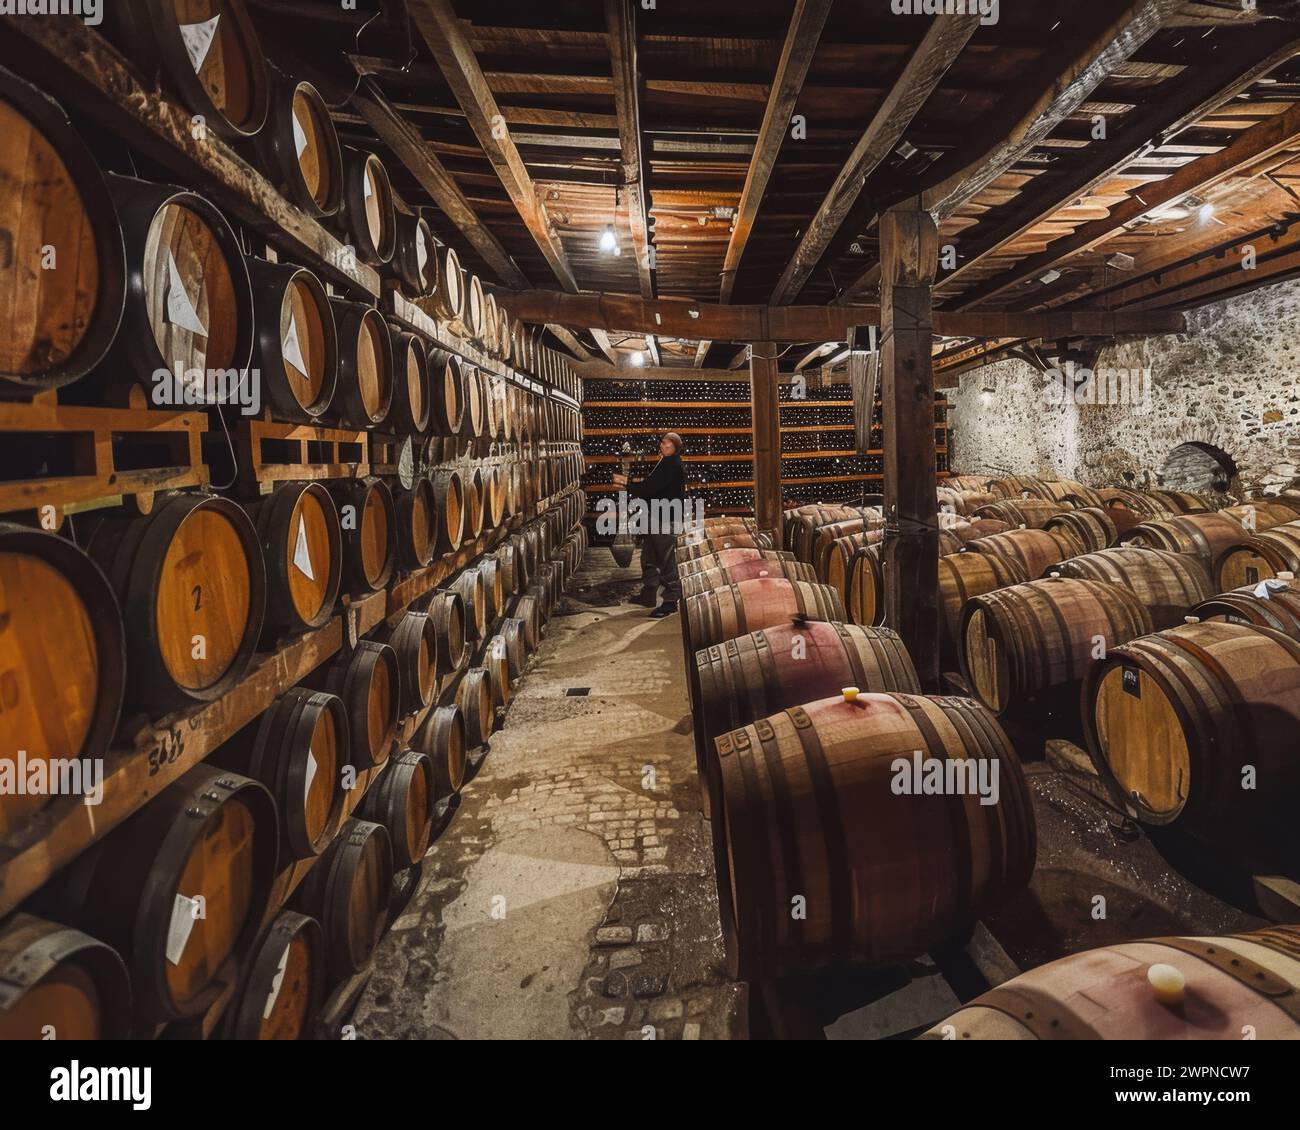 Many wooden barrels arranged in a room. Stock Photo